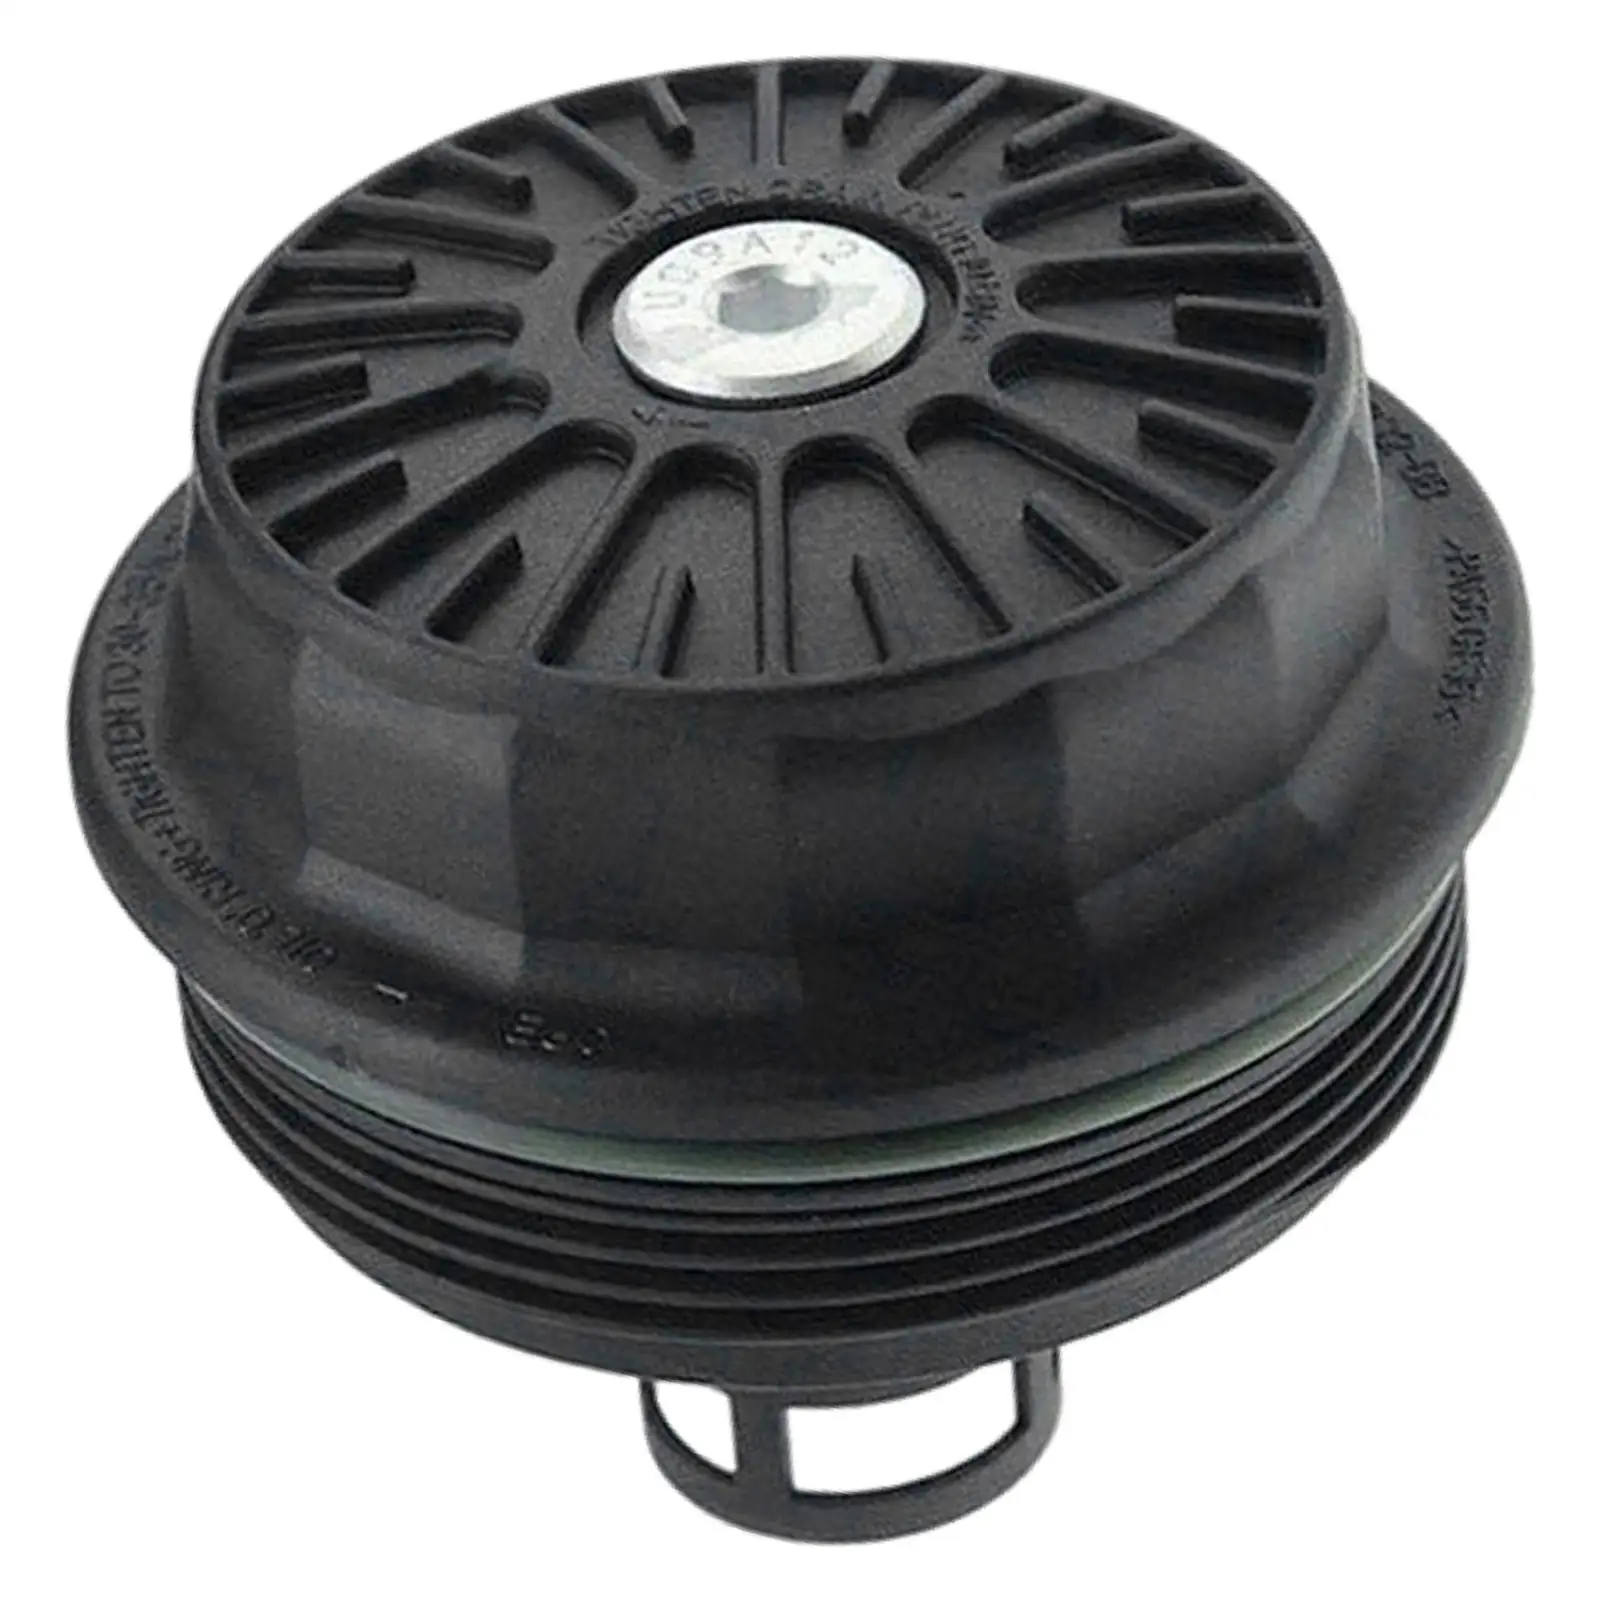 Oil Filter Housing Cover Assembly Lid Fit for Mazda Accessories Replacement Parts 1S7G6A832BB